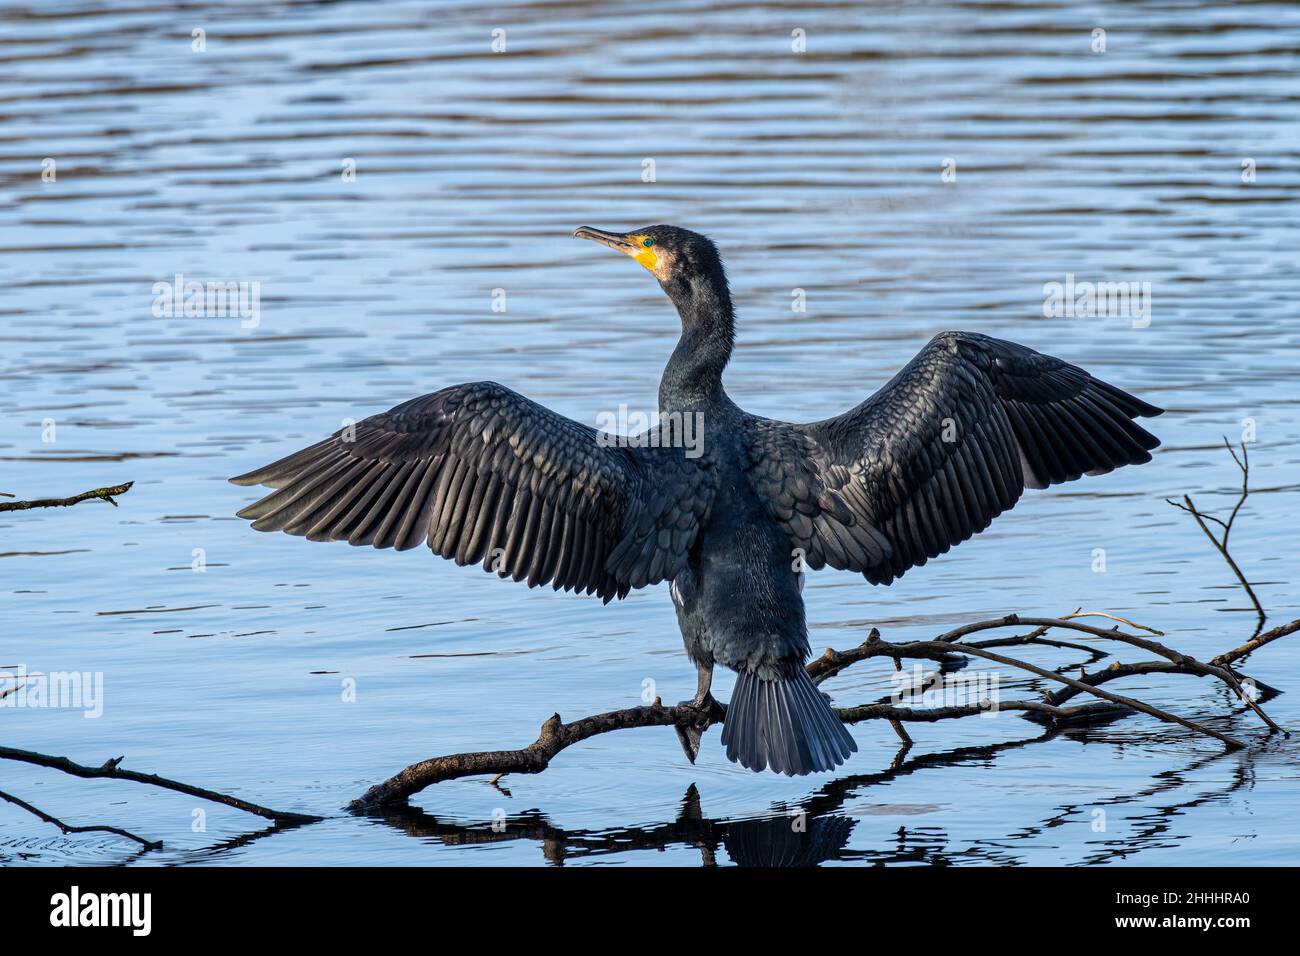 A Cormorant, Phalacrocorax carbo at a lake perched on tree branches drying it's wings. Stock Photo